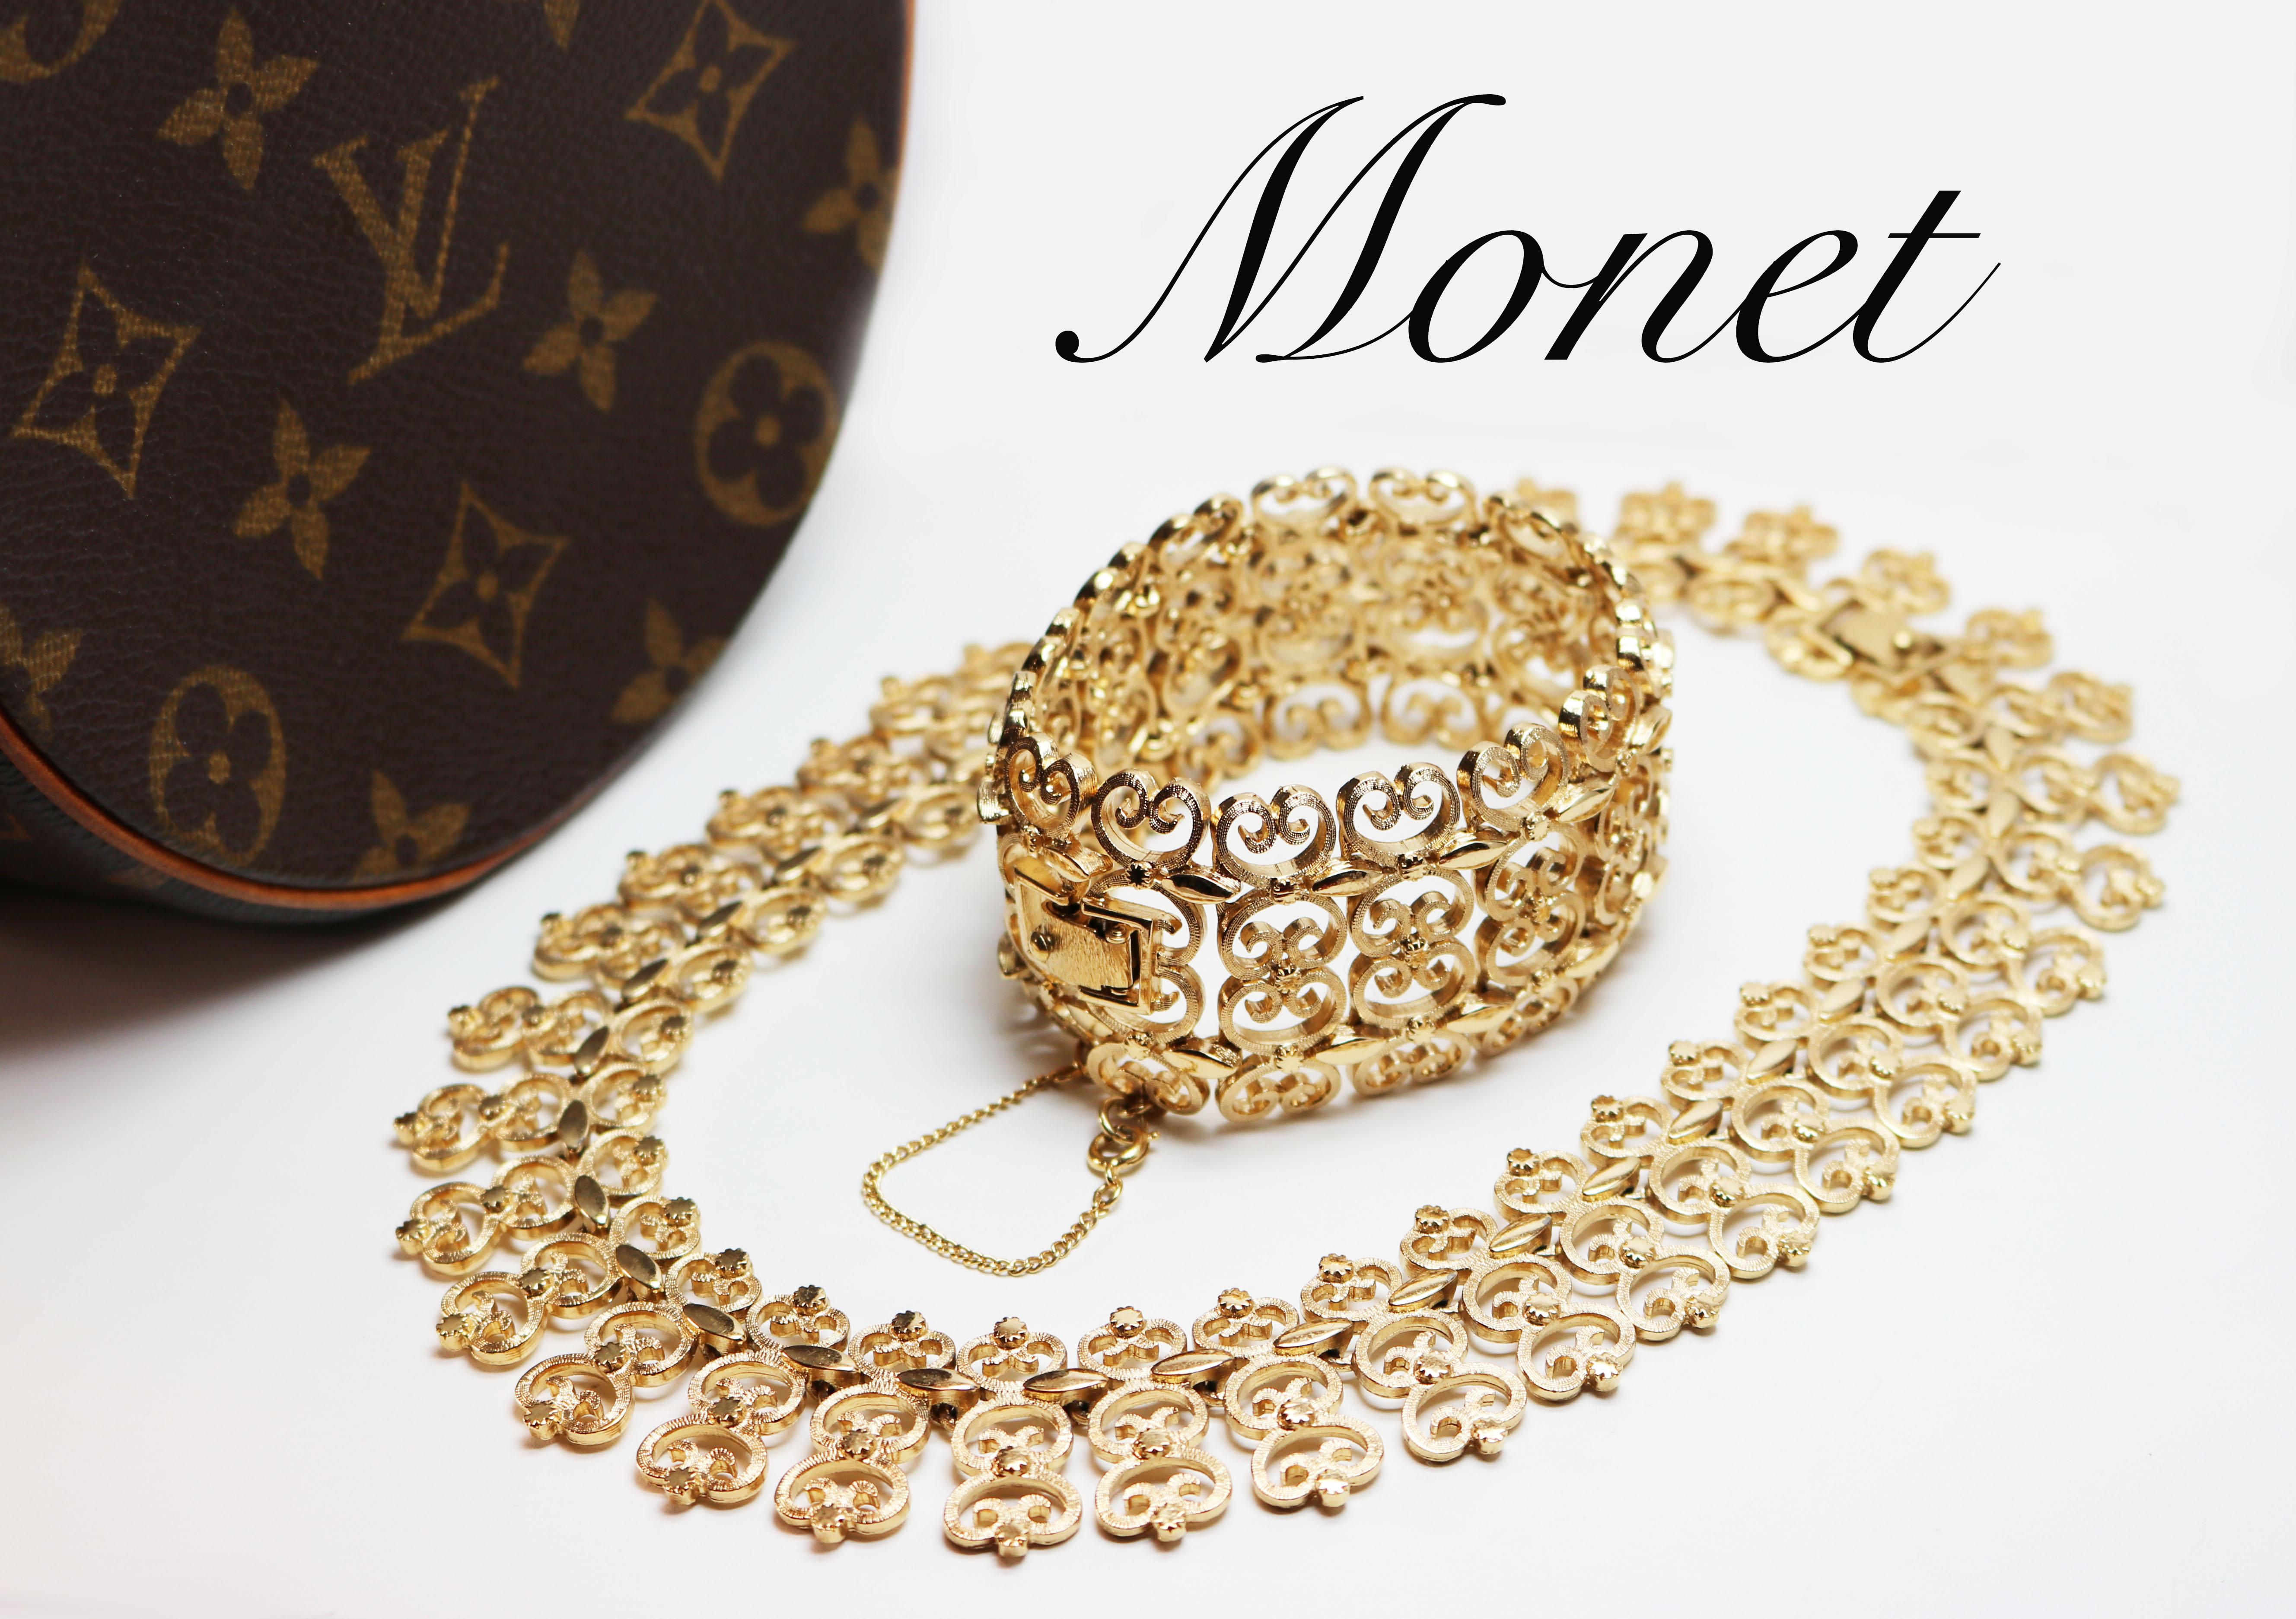 This stunning Monet parure features gold filigree links with polished, geometric, gold highlights forming these unique, chic and collectible pieces. The bracelet measures 7.5